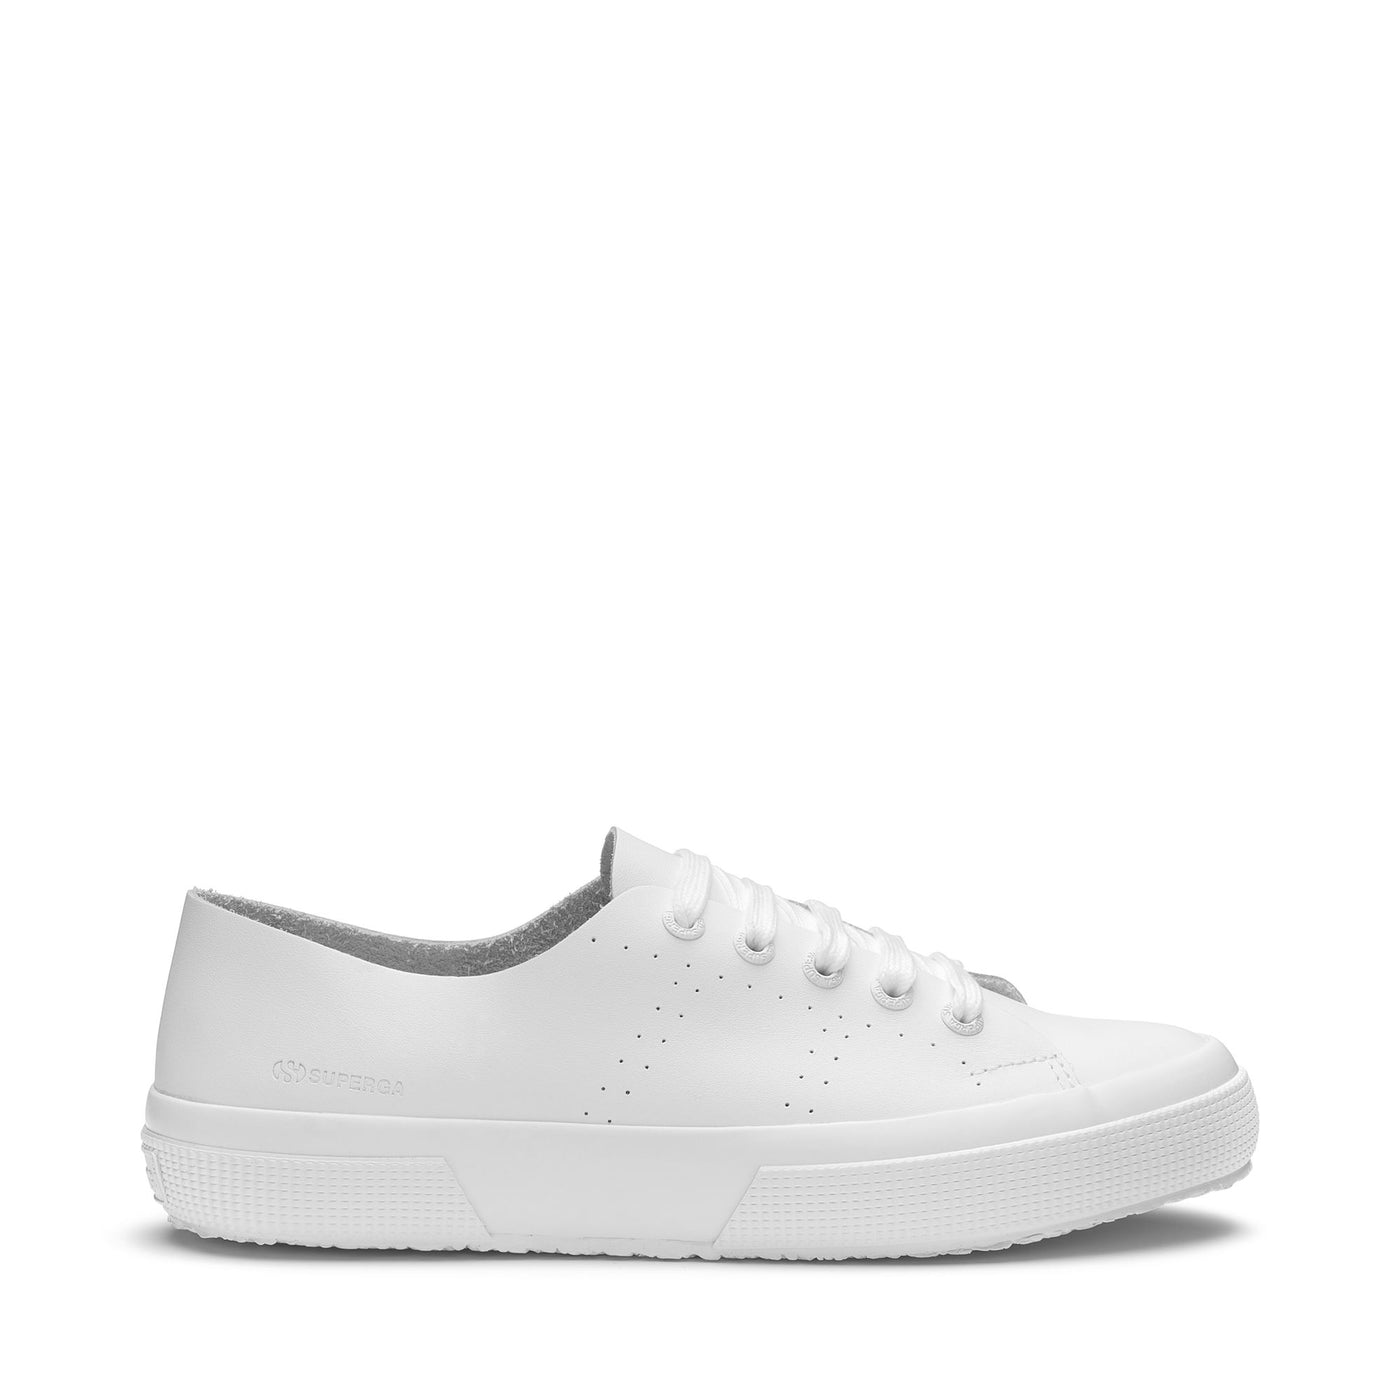 Le Superga Unisex 2750 MORPHING MULE LEATHER Low Cut TOTAL WHITE Photo (jpg Rgb)			